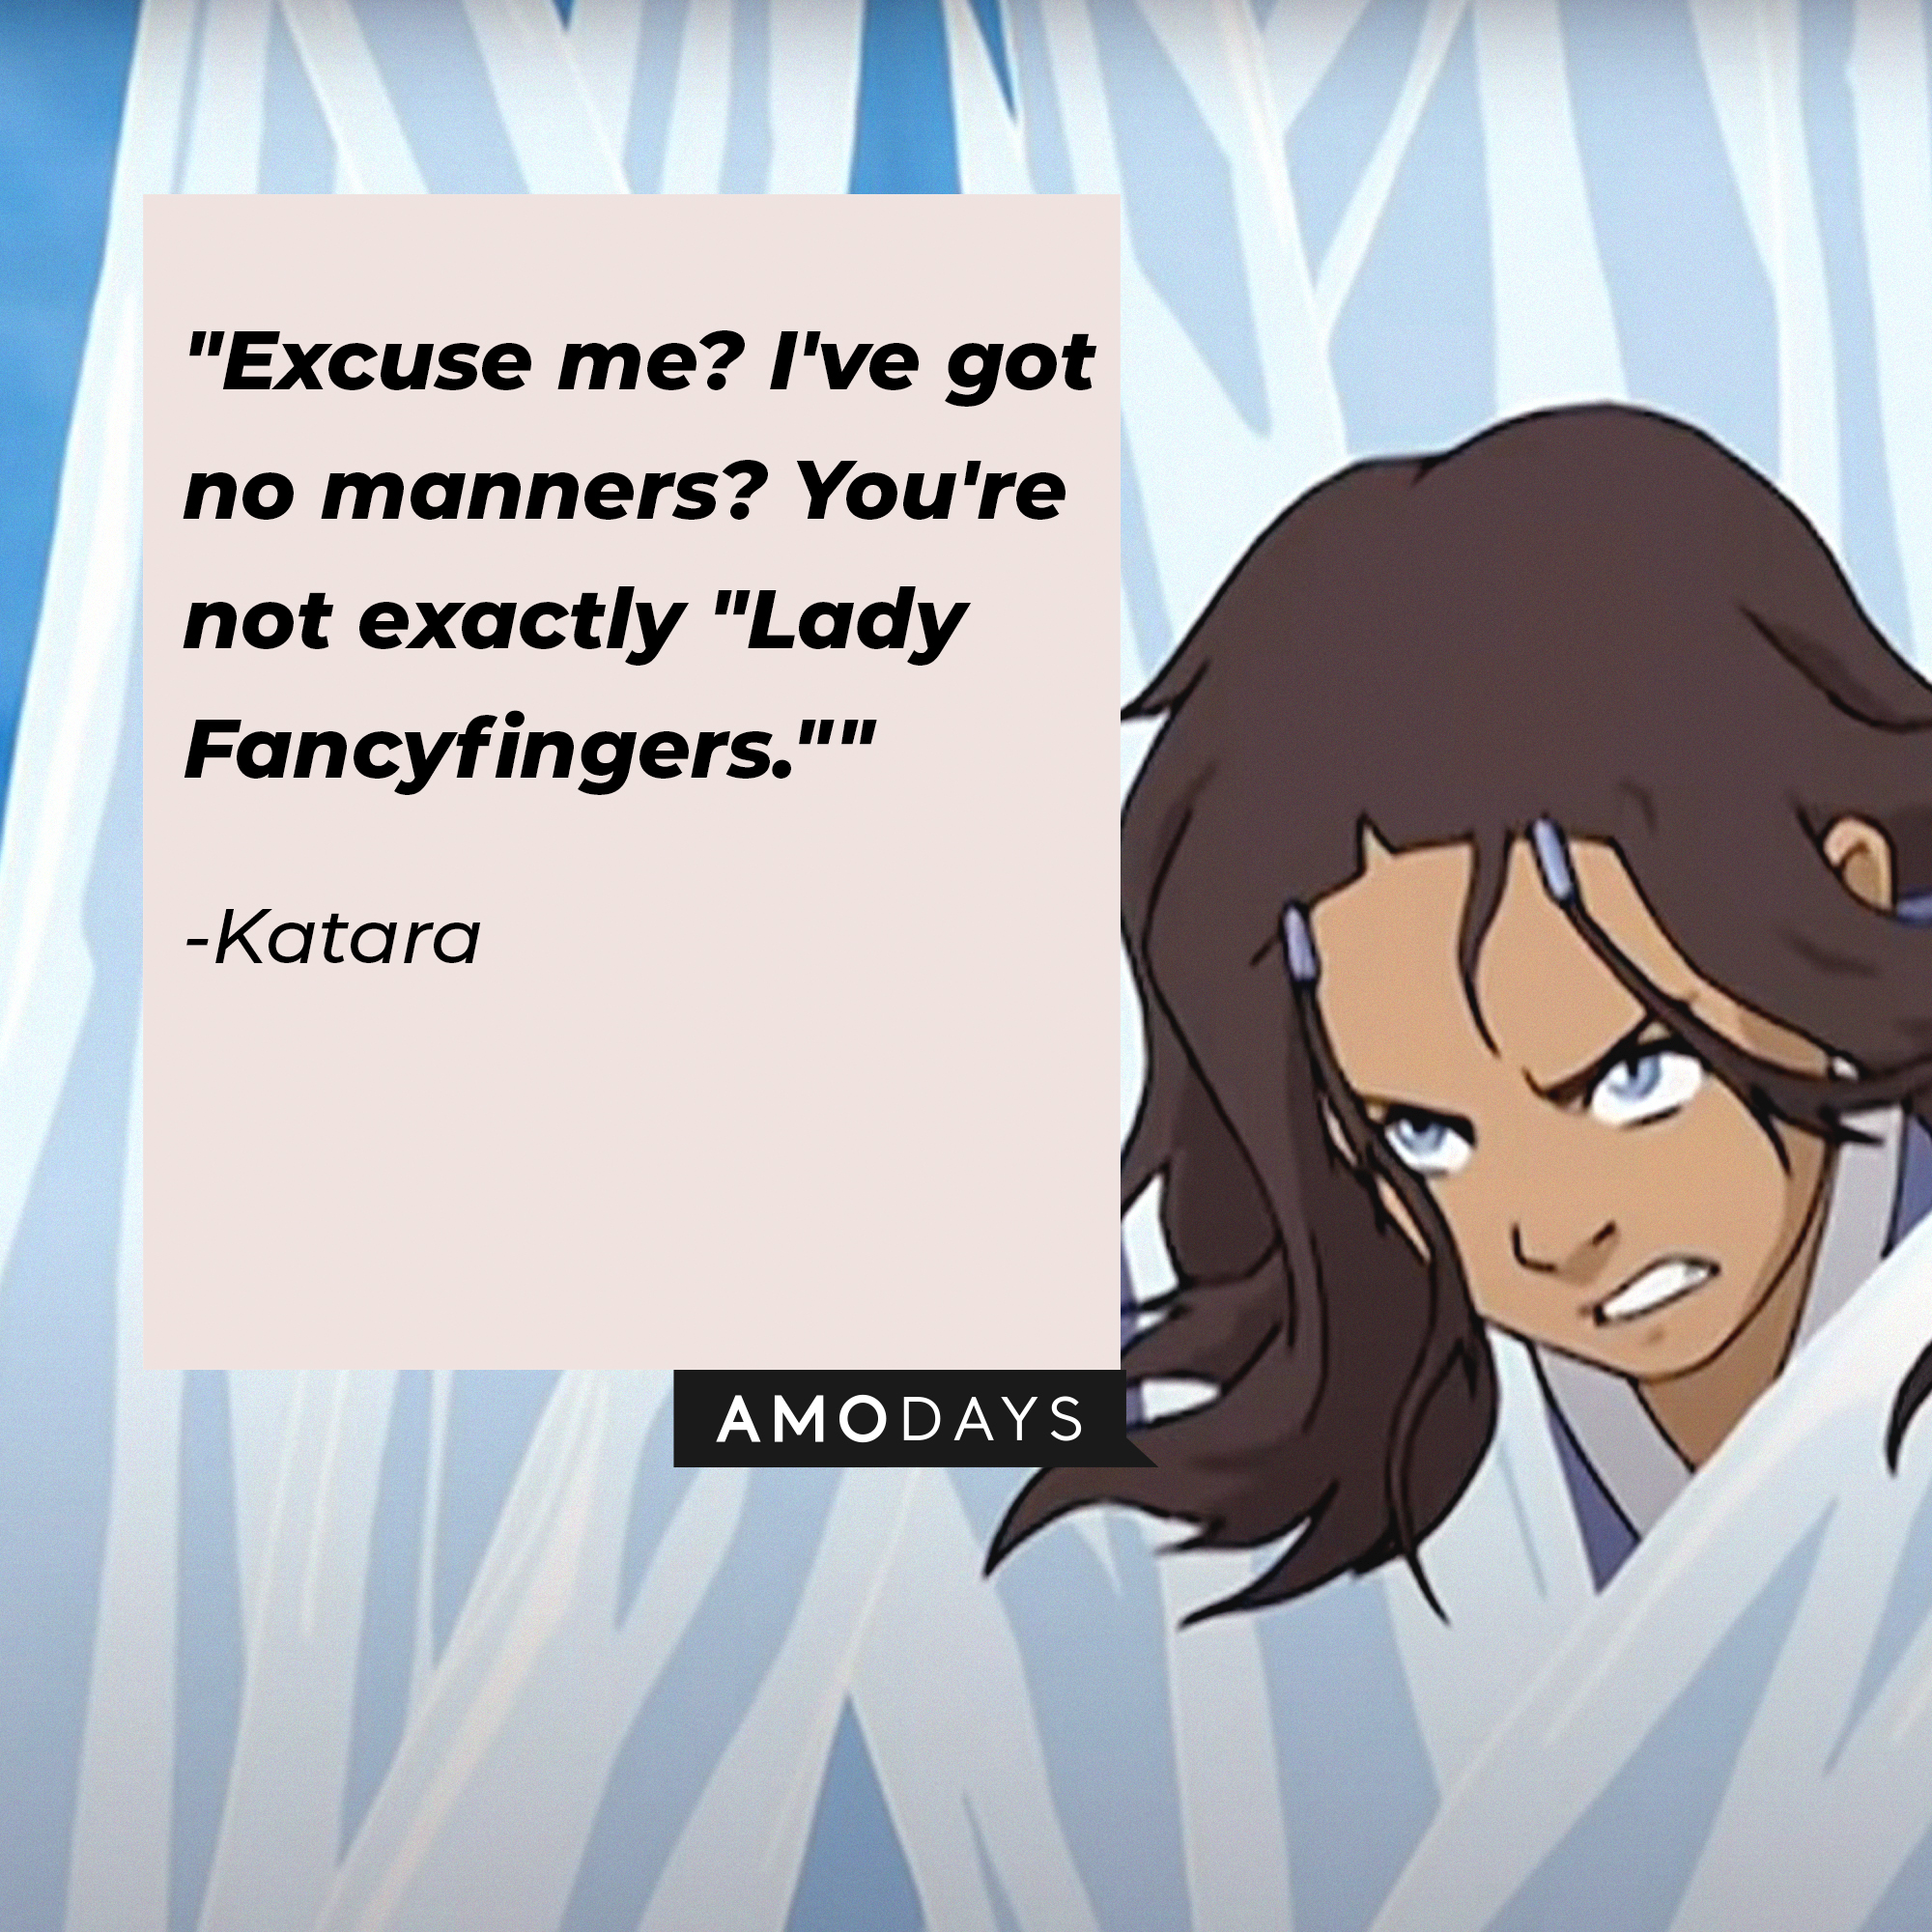 Katara's quote: "Excuse me? I've got no manners? You're not exactly "Lady Fancyfingers."" | Source: Youtube.com/TeamAvatar